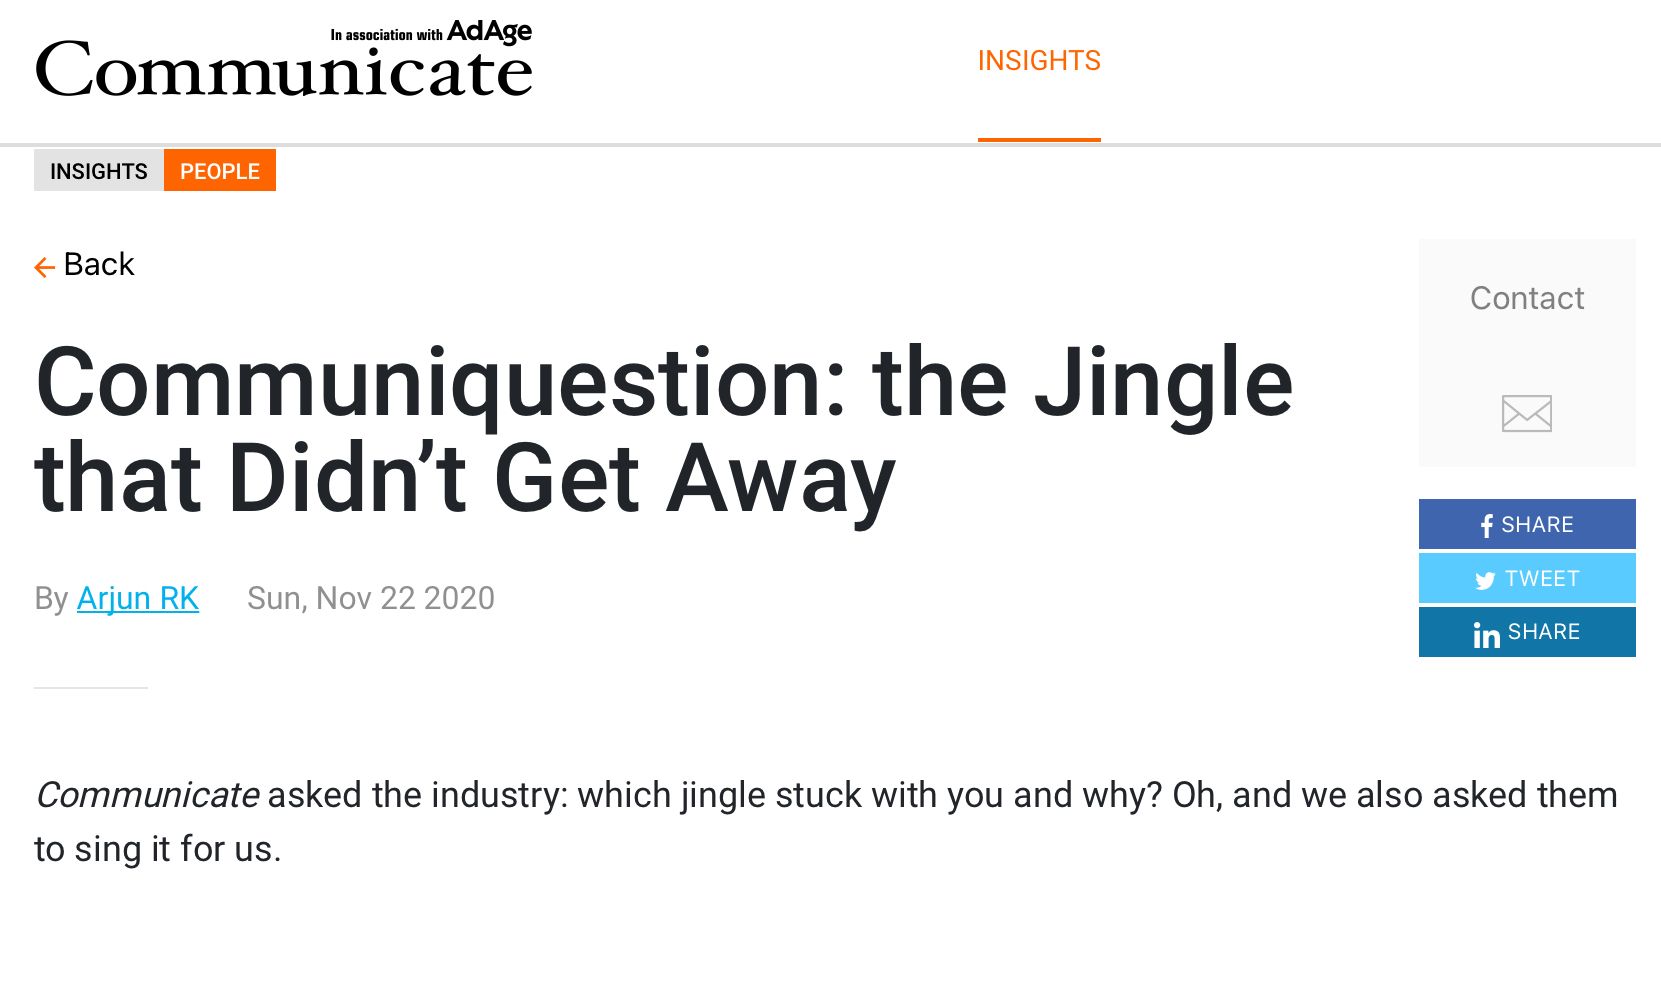 Communicate: The Jingle that Didn’t Get Away